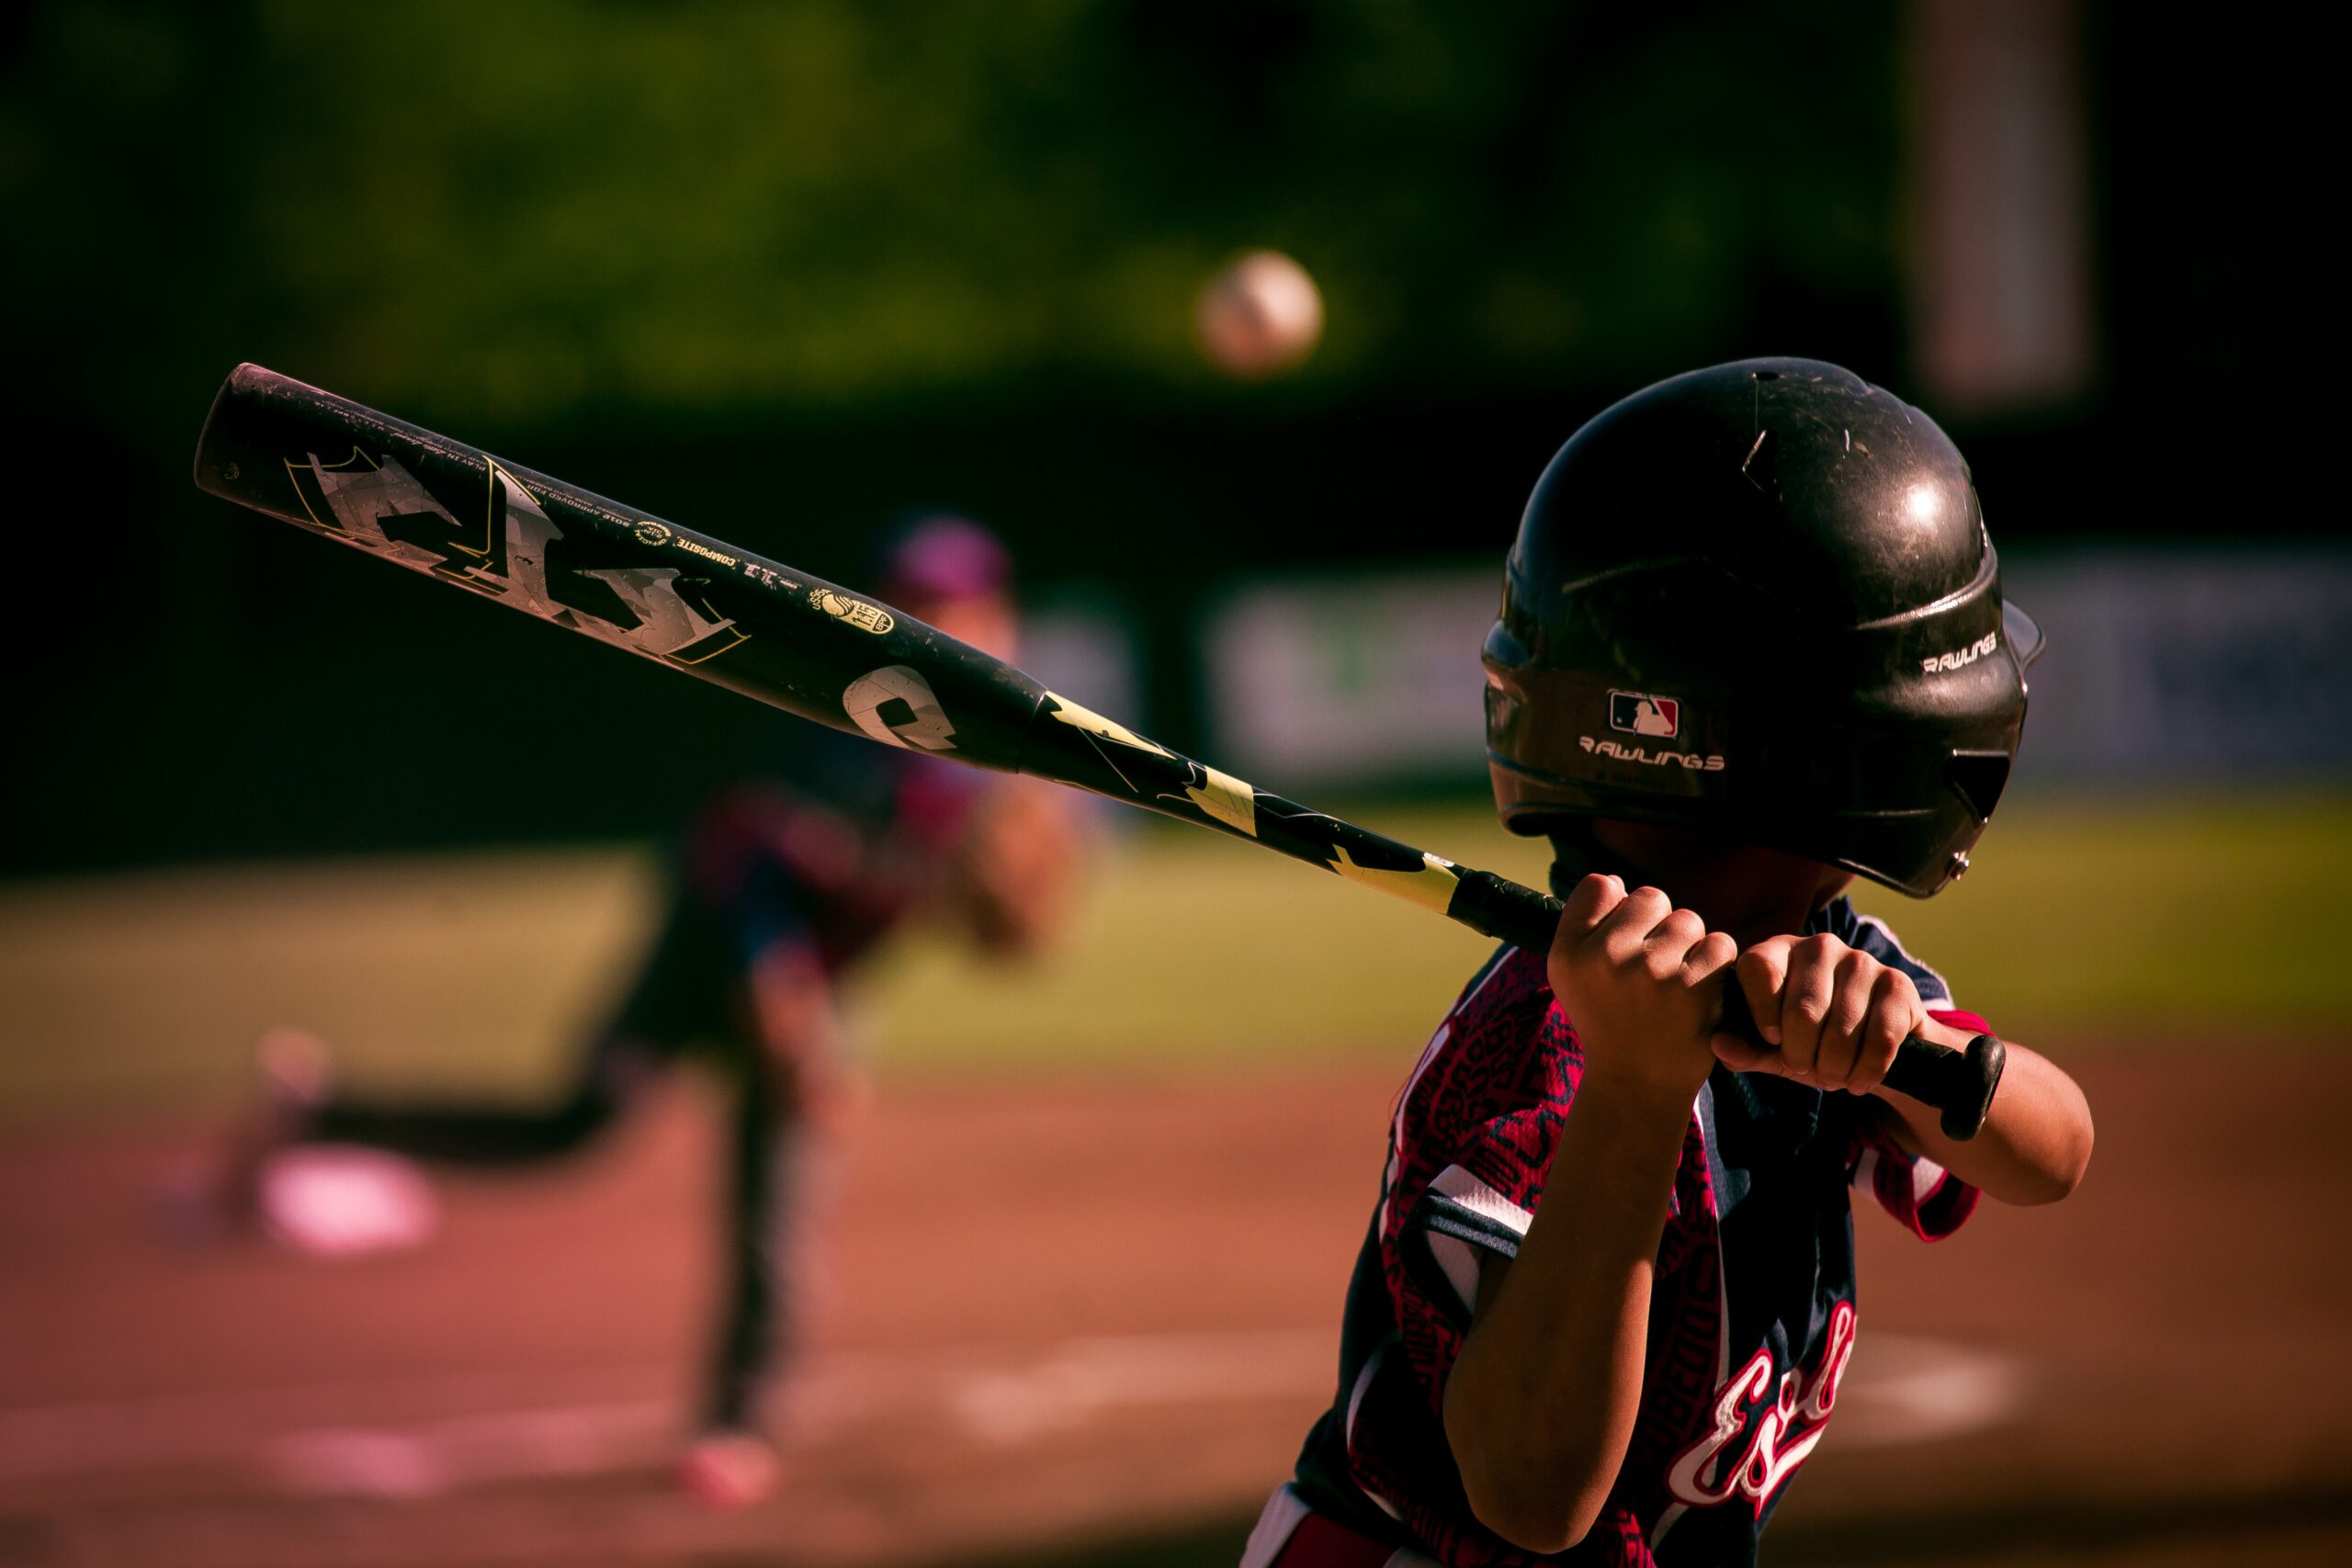 Youth Baseball, Softball & T-Ball: What Parents Need to Know